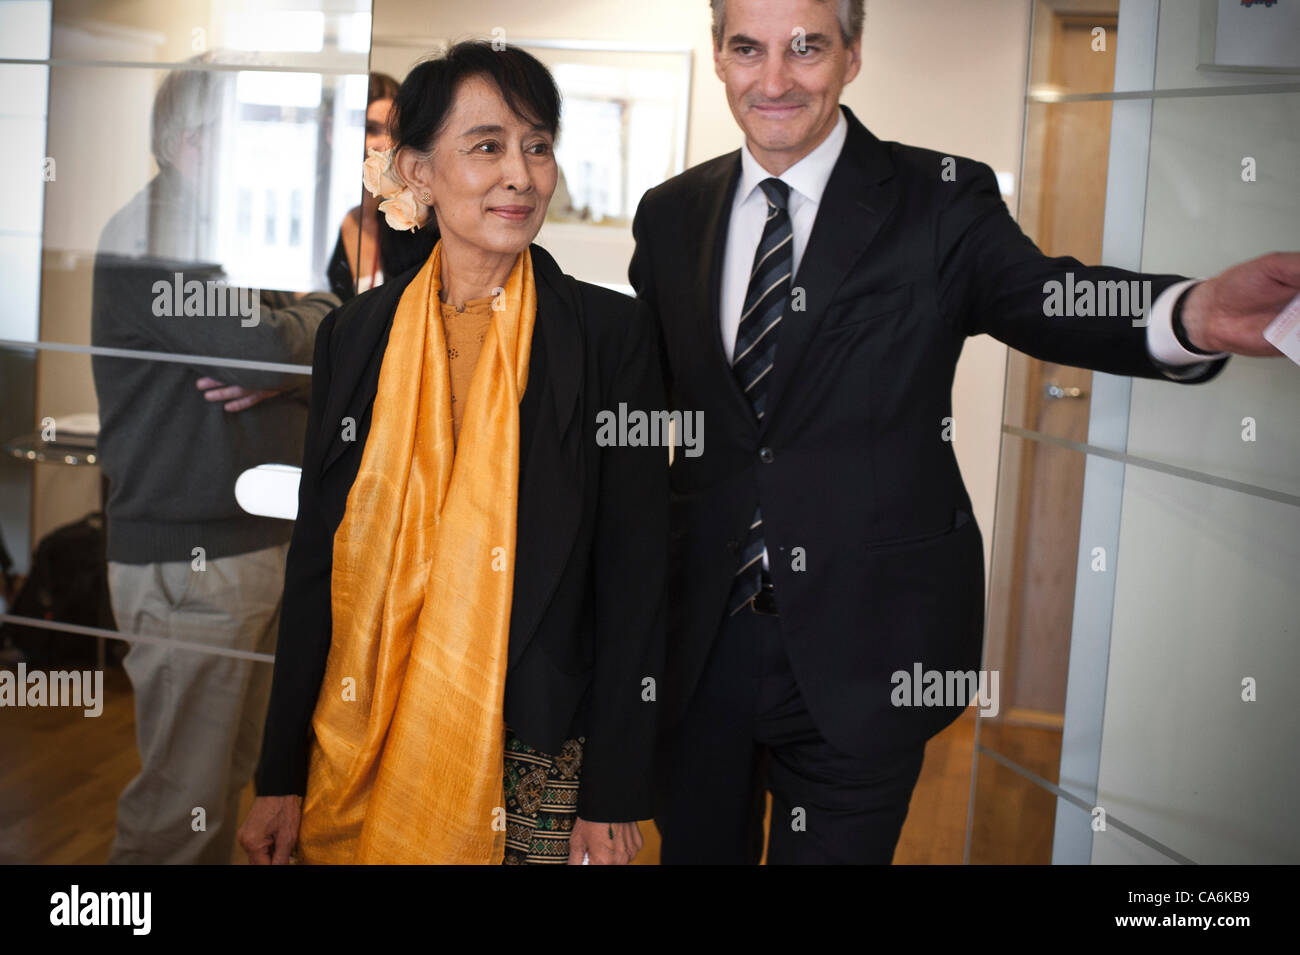 June 17, 2012 - Oslo, Norway: Aung San Suu Kyi visits Jonas Gahr Store, Norway's Minister of Foreign Affairs, inside his office at The Ministry of Foreign Affairs. Stock Photo